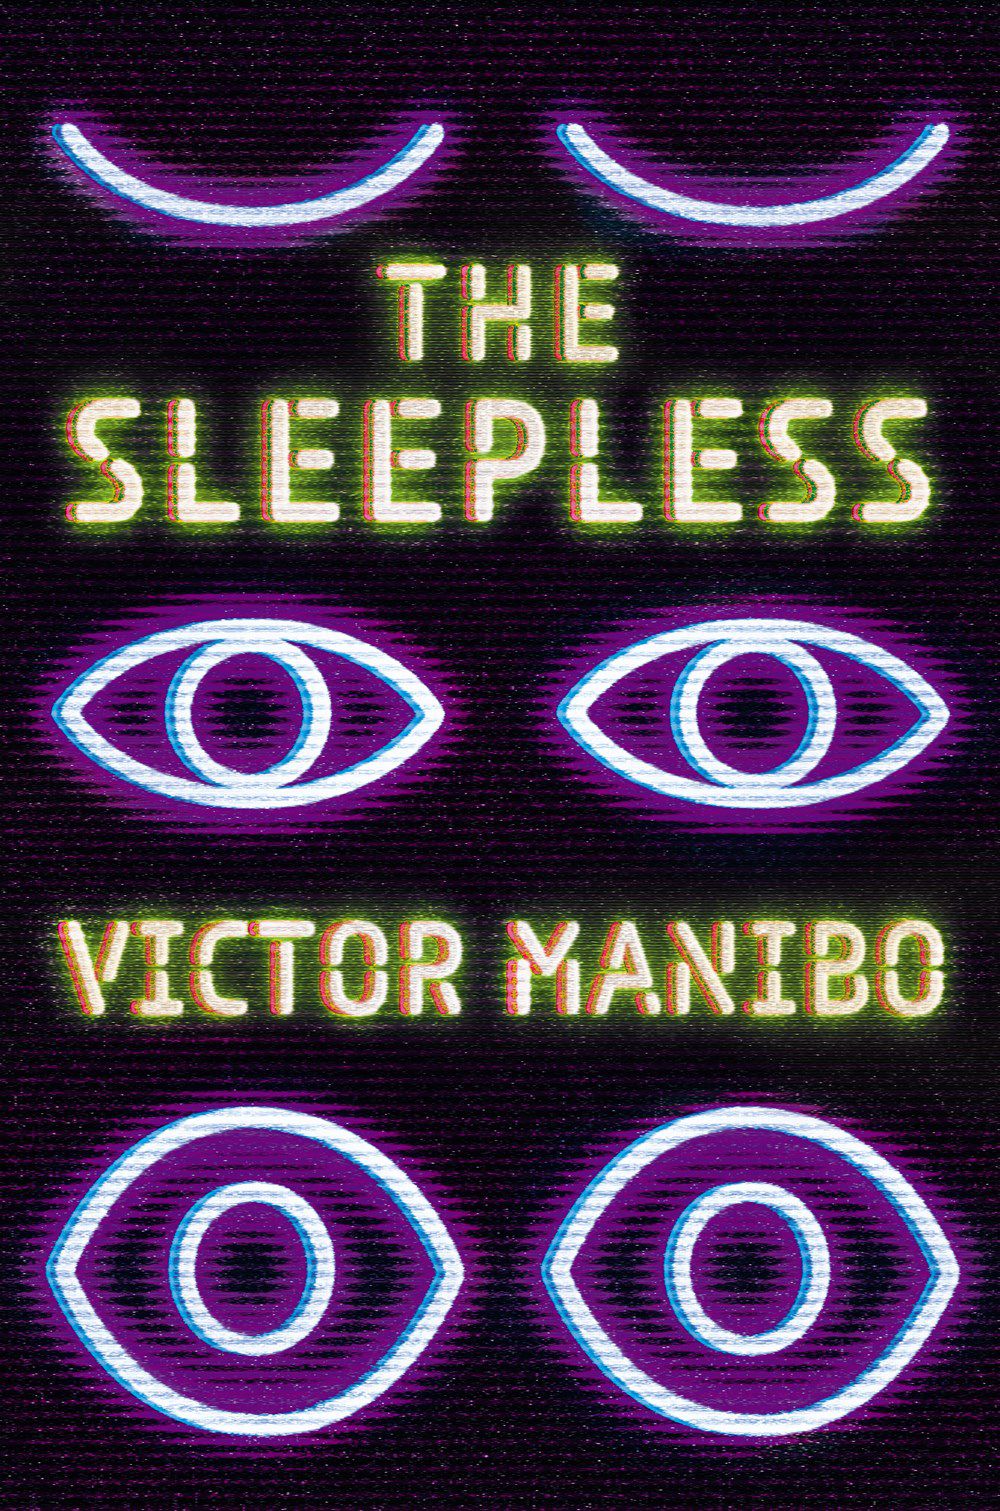 Cover image of The Sleepless by Victor Manibo, featuring three pairs of eyes in neon lights that are gradually opening.